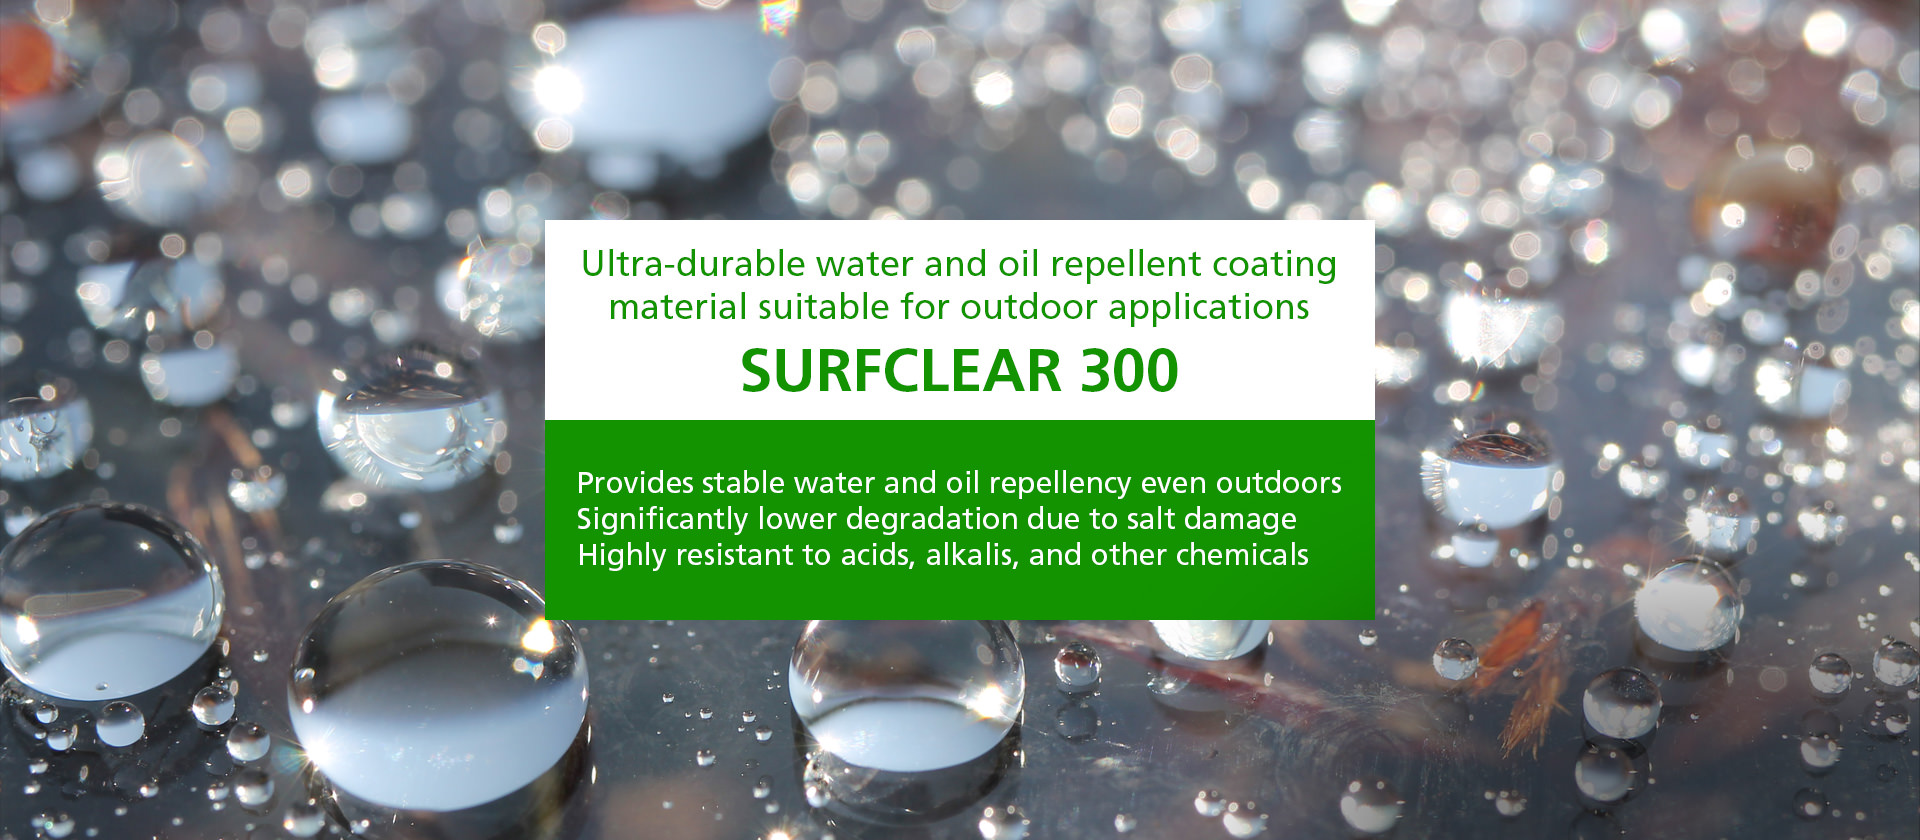 Water and oil repellent coating SURFCLEAR